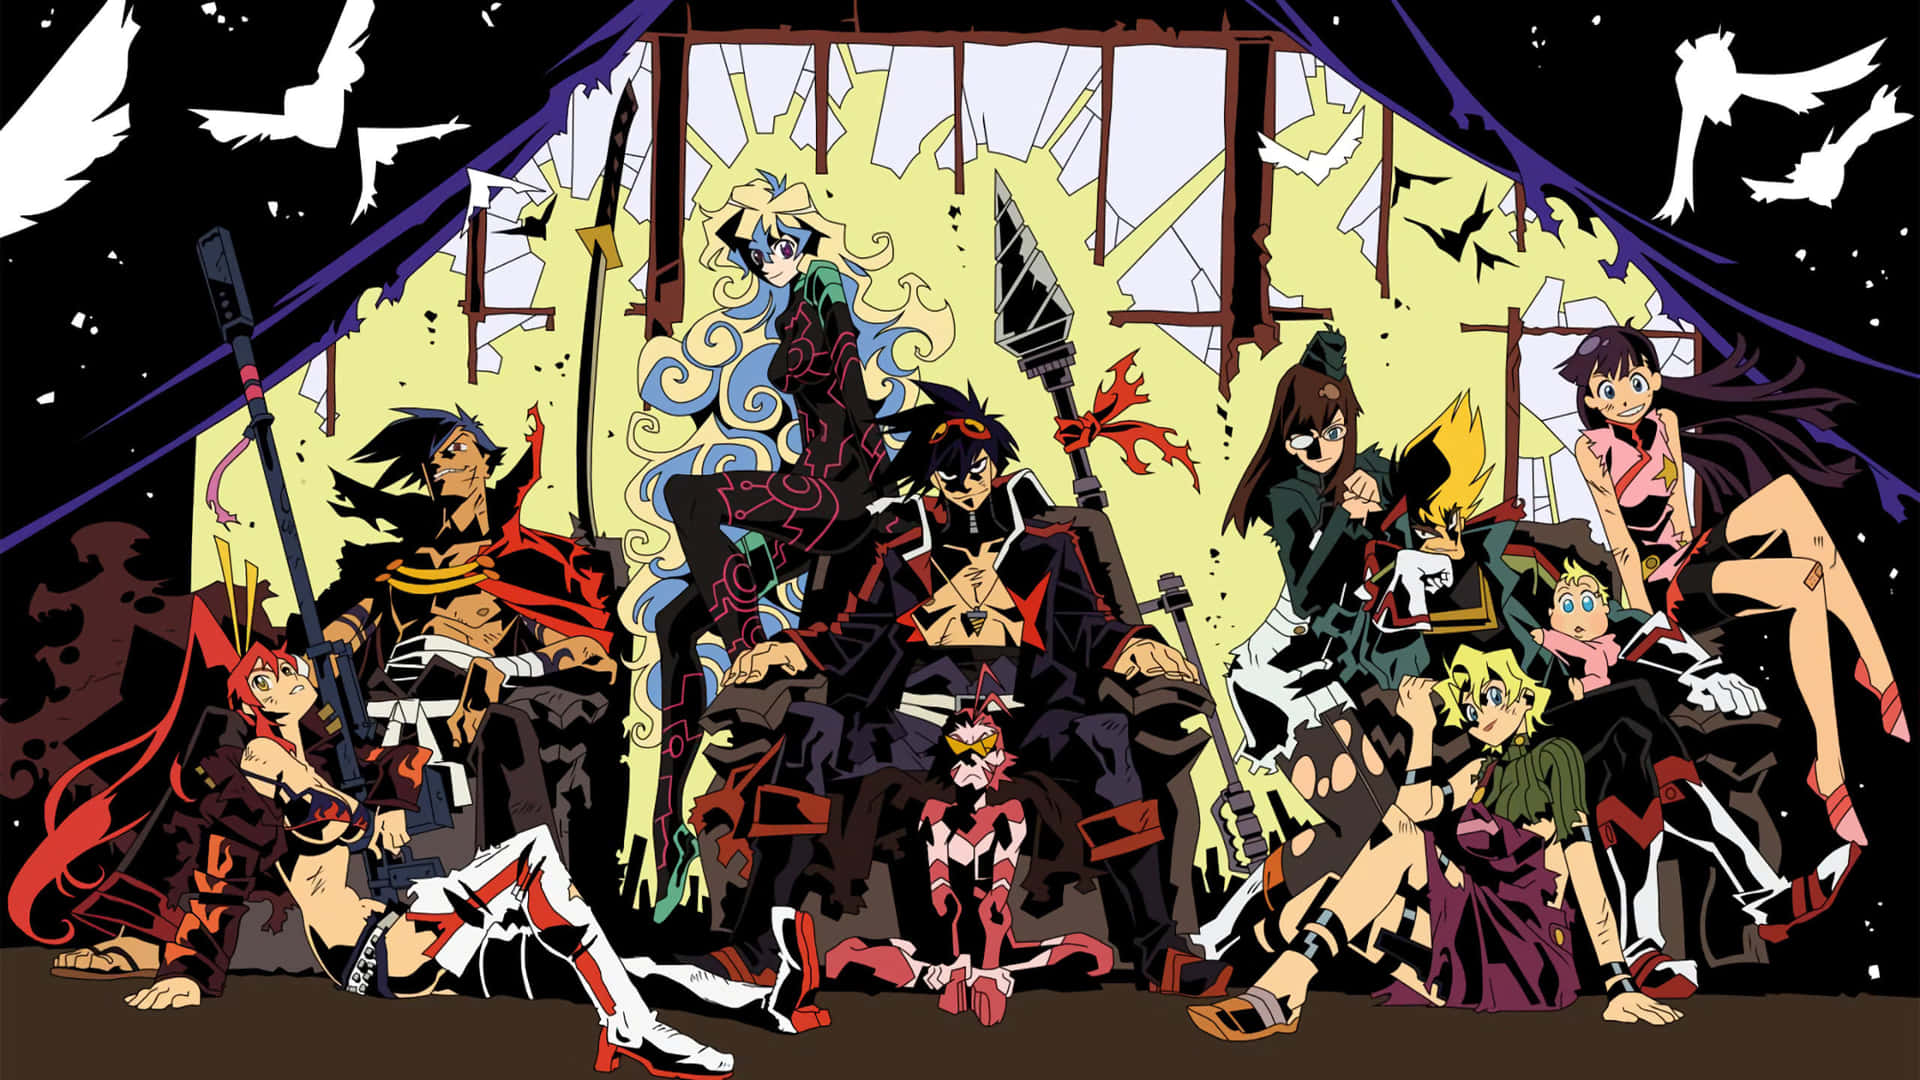 "The sky's no limit with Gurren Lagann!"